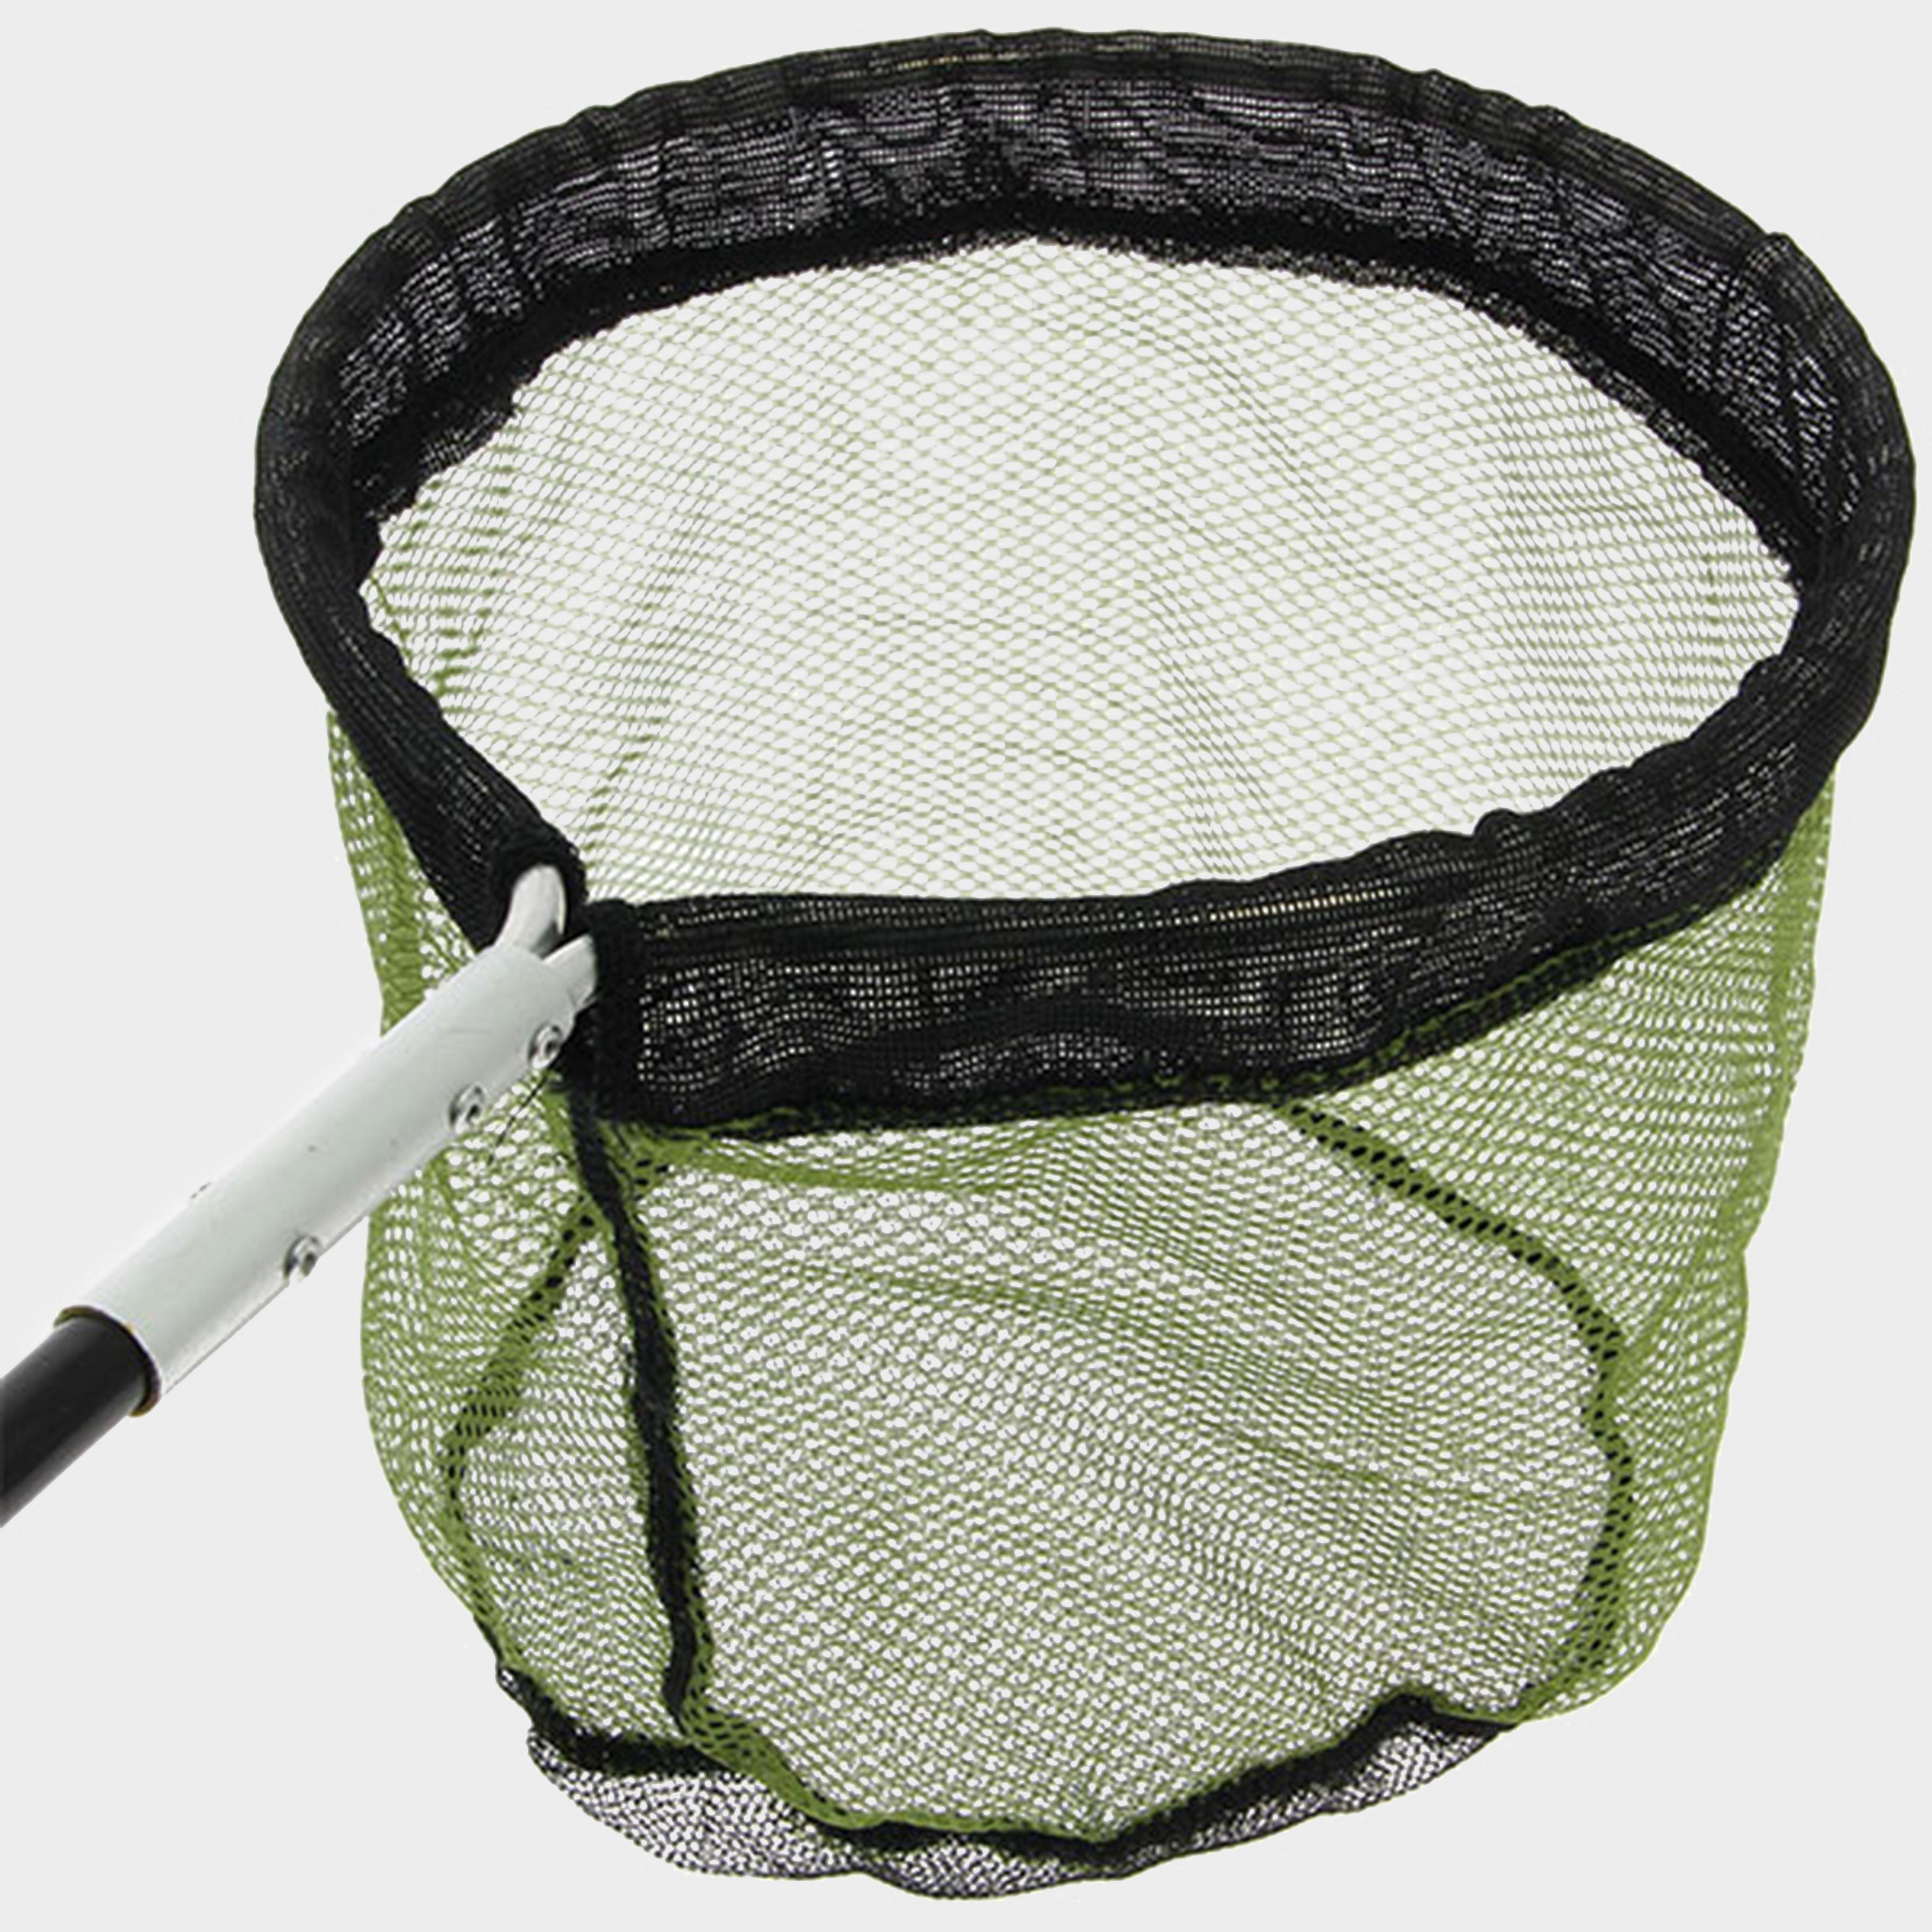 NGT Rockpool Combo Fishing Net Review